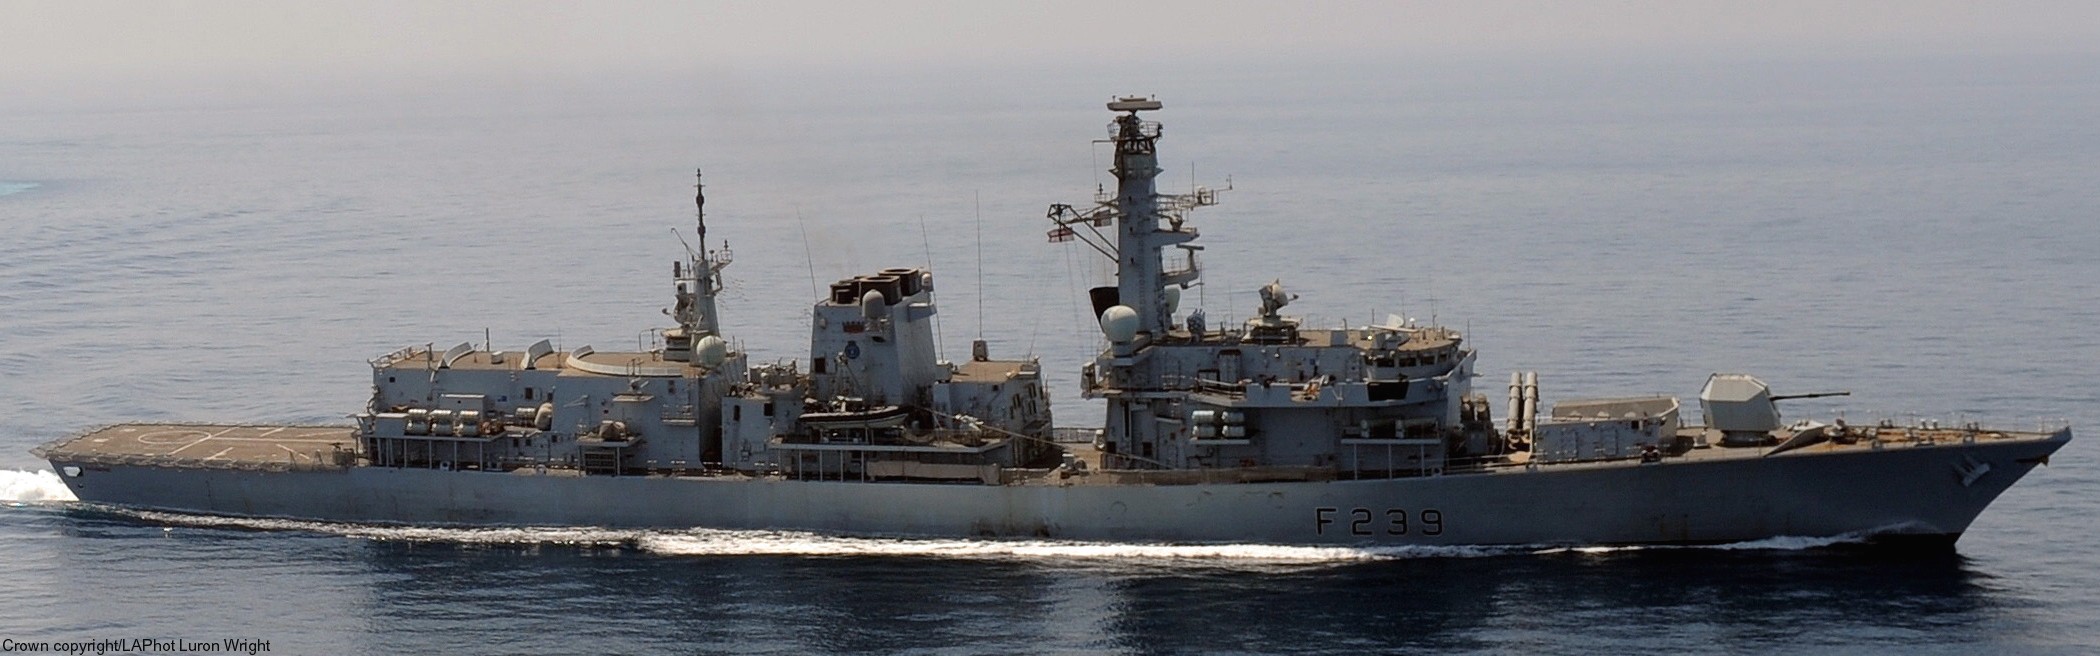 f-239 hms richmond type 23 duke class guided missile frigate ffg royal navy 02